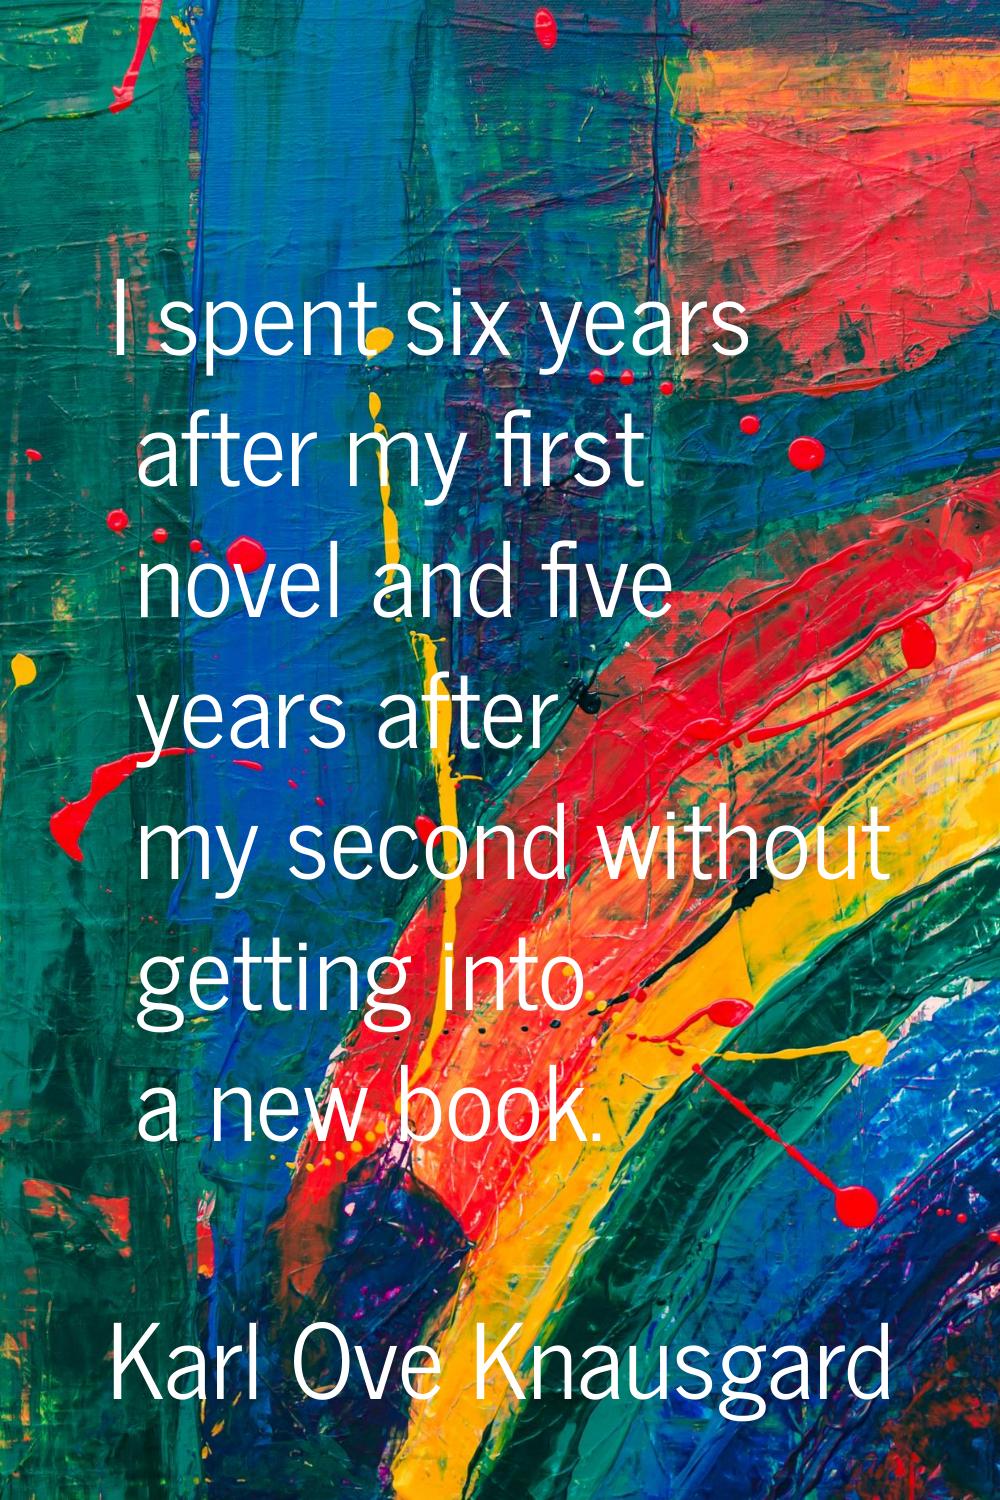 I spent six years after my first novel and five years after my second without getting into a new bo